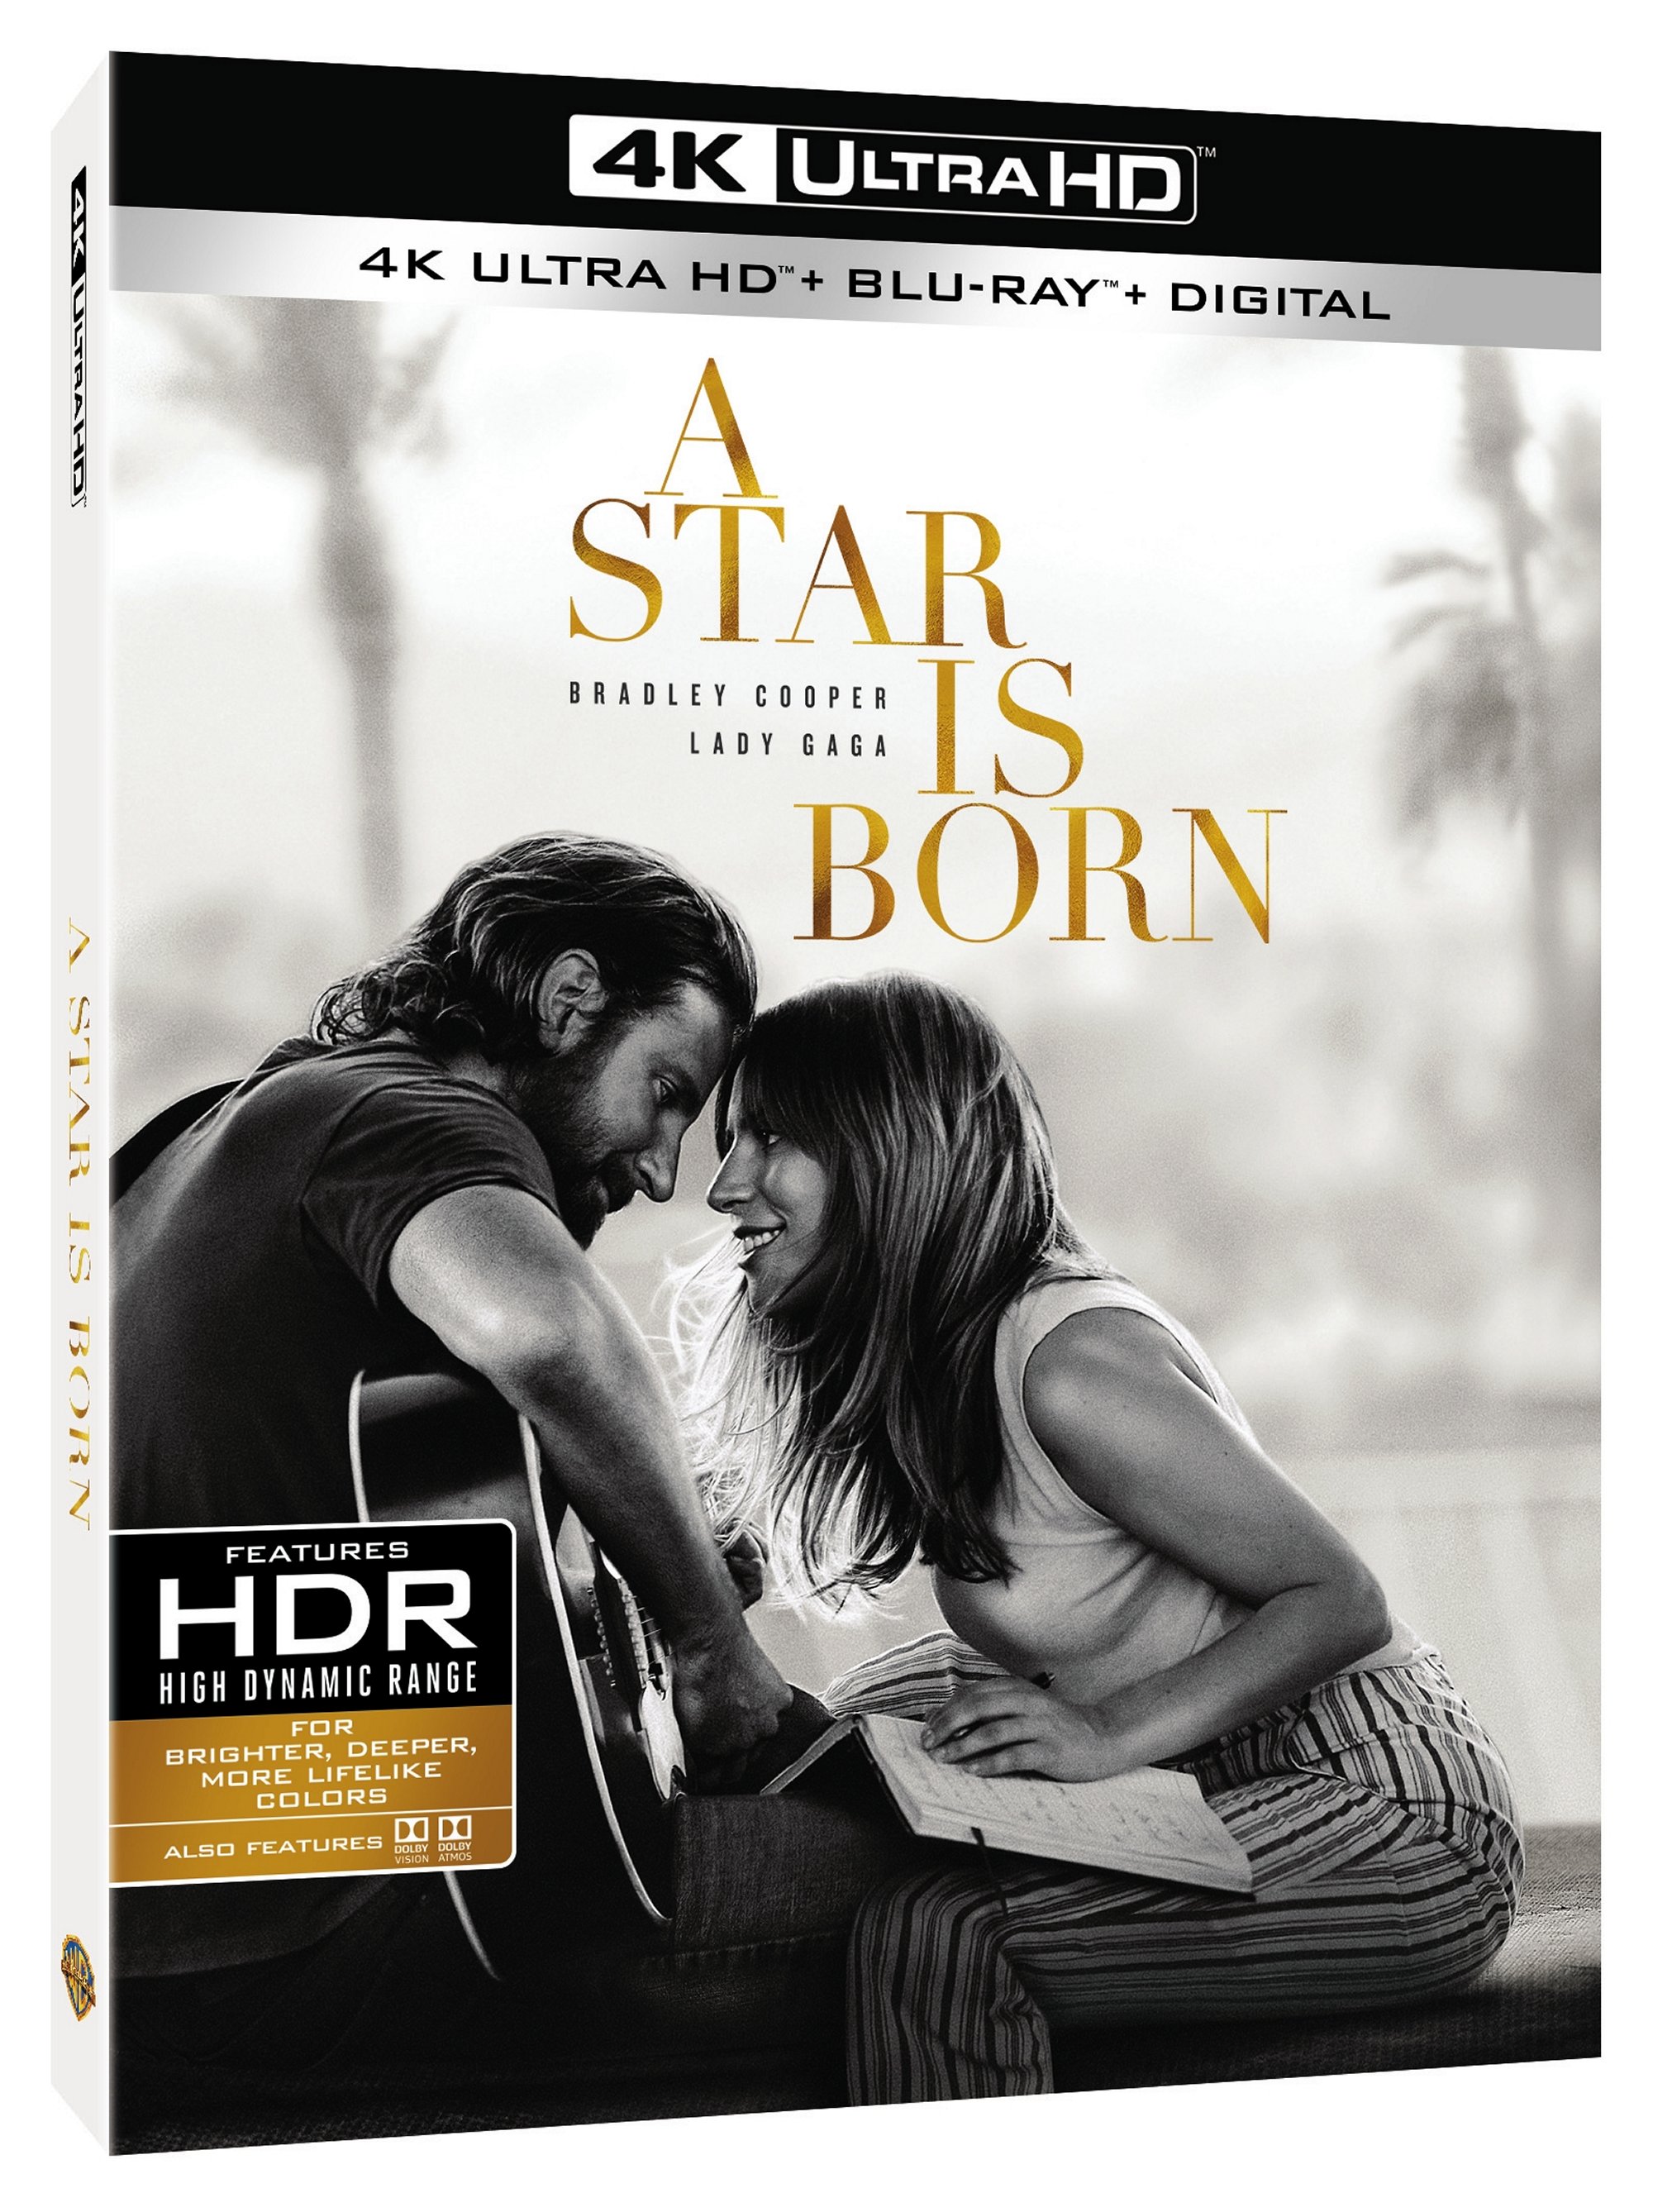 A Star Is Born 4K Ultra HD Combo Pack cover (Warner Bros. Home Entertainment)